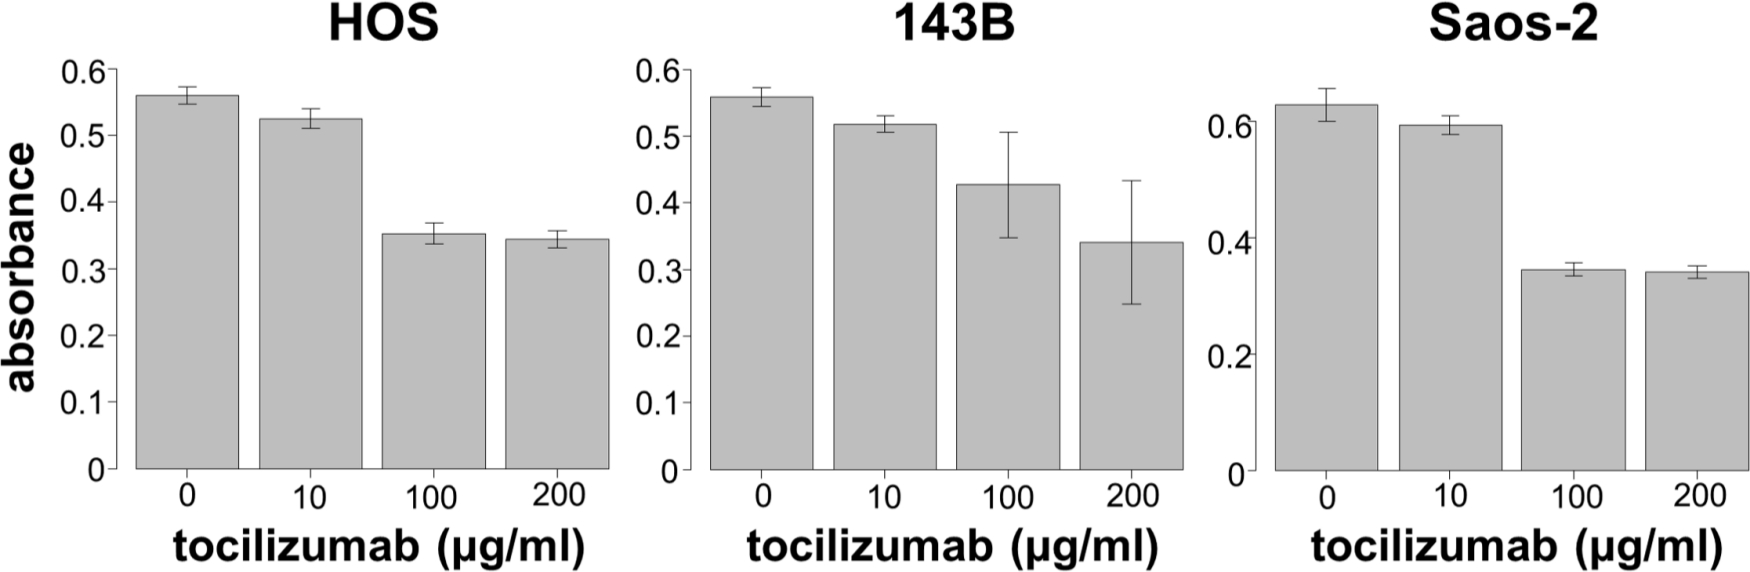 Fig. 5 
            Effect of tocilizumab treatment on proliferation of 143B, HOS, and Saos-2 cells.
          